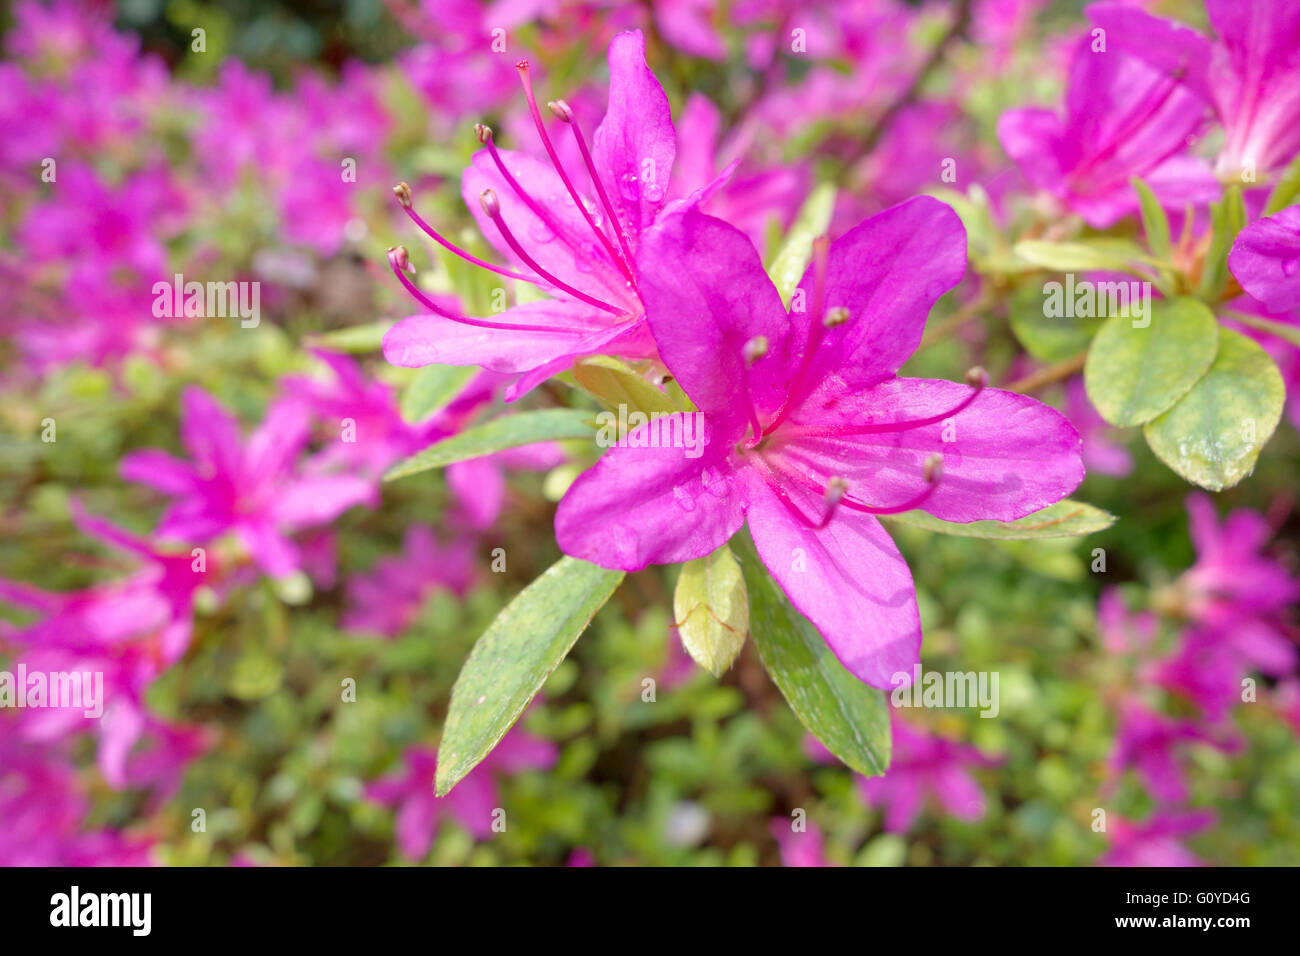 Azalea, Rhododendron, Azalea Japonica Madame Van Hecke, Beauty in Nature, Colour, Cottage garden plant, Evergreen, Flower, Spring Flowering, Frost hardy, Growing, Outdoor, Plant, Shrub, Stamen, Pink, Stock Photo